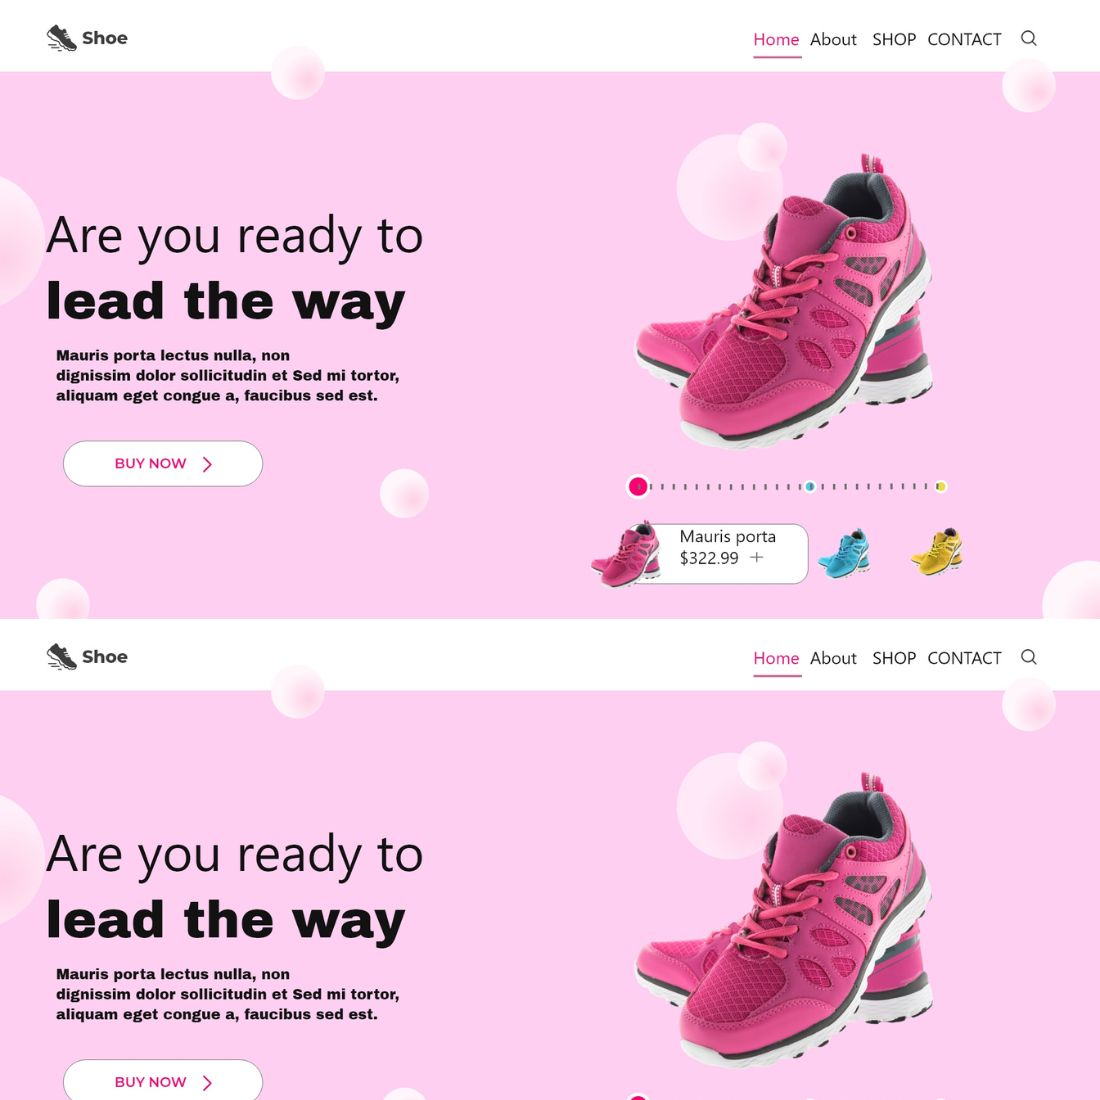 Shoes Store Landing Page cover image.